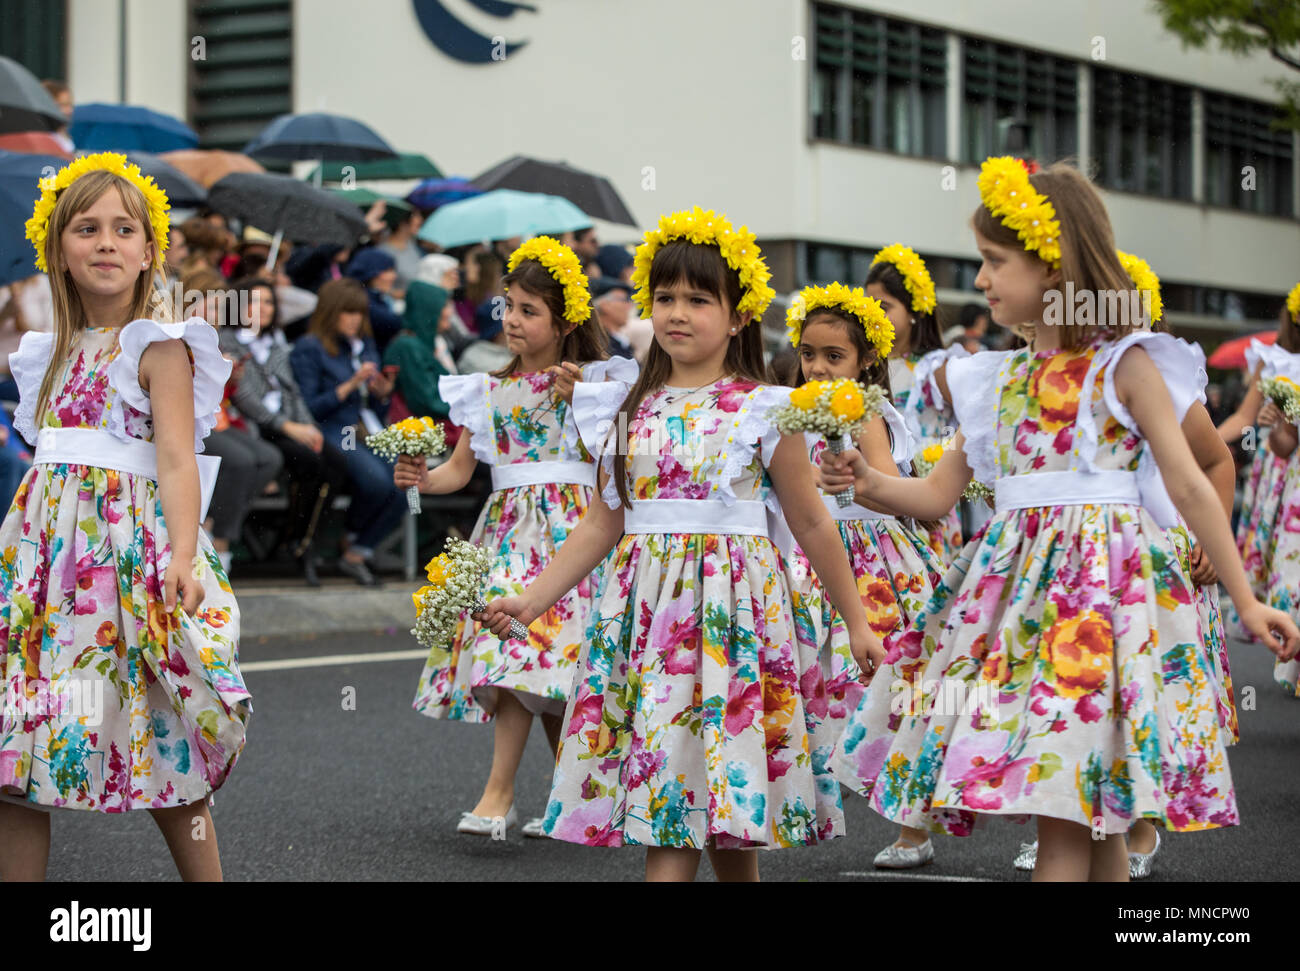 Funchal; Madeira; Portugal - April 22; 2018: A group of girls in colorful dresses are dancing at Madeira Flower Festival Parade in Funchal on the Isla Stock Photo